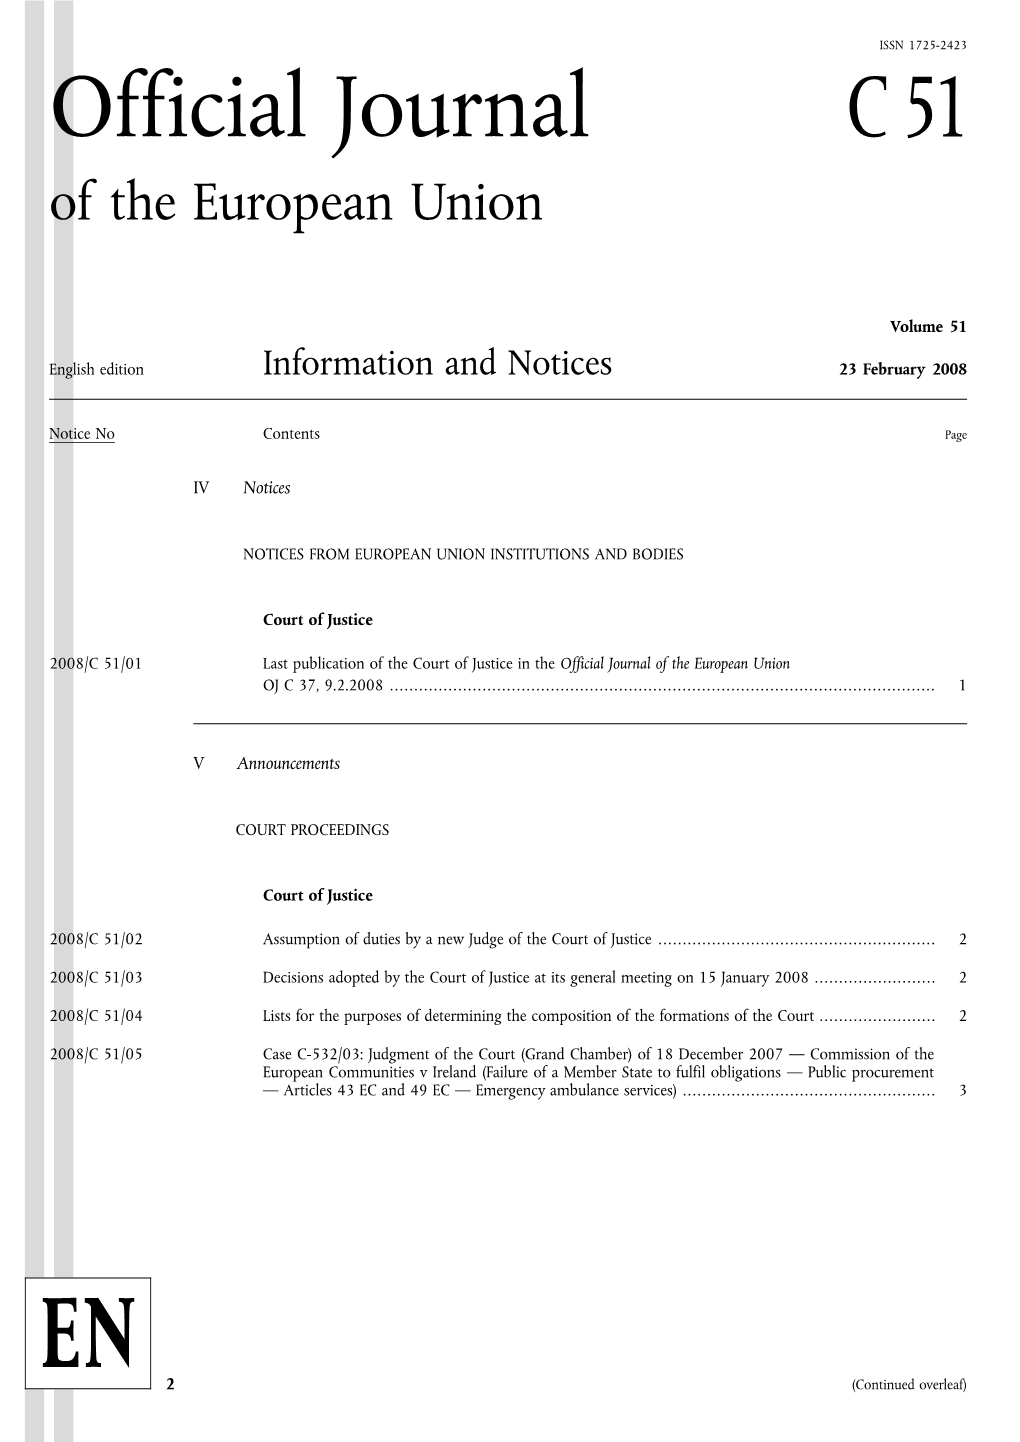 Official Journal C 51 of the European Union